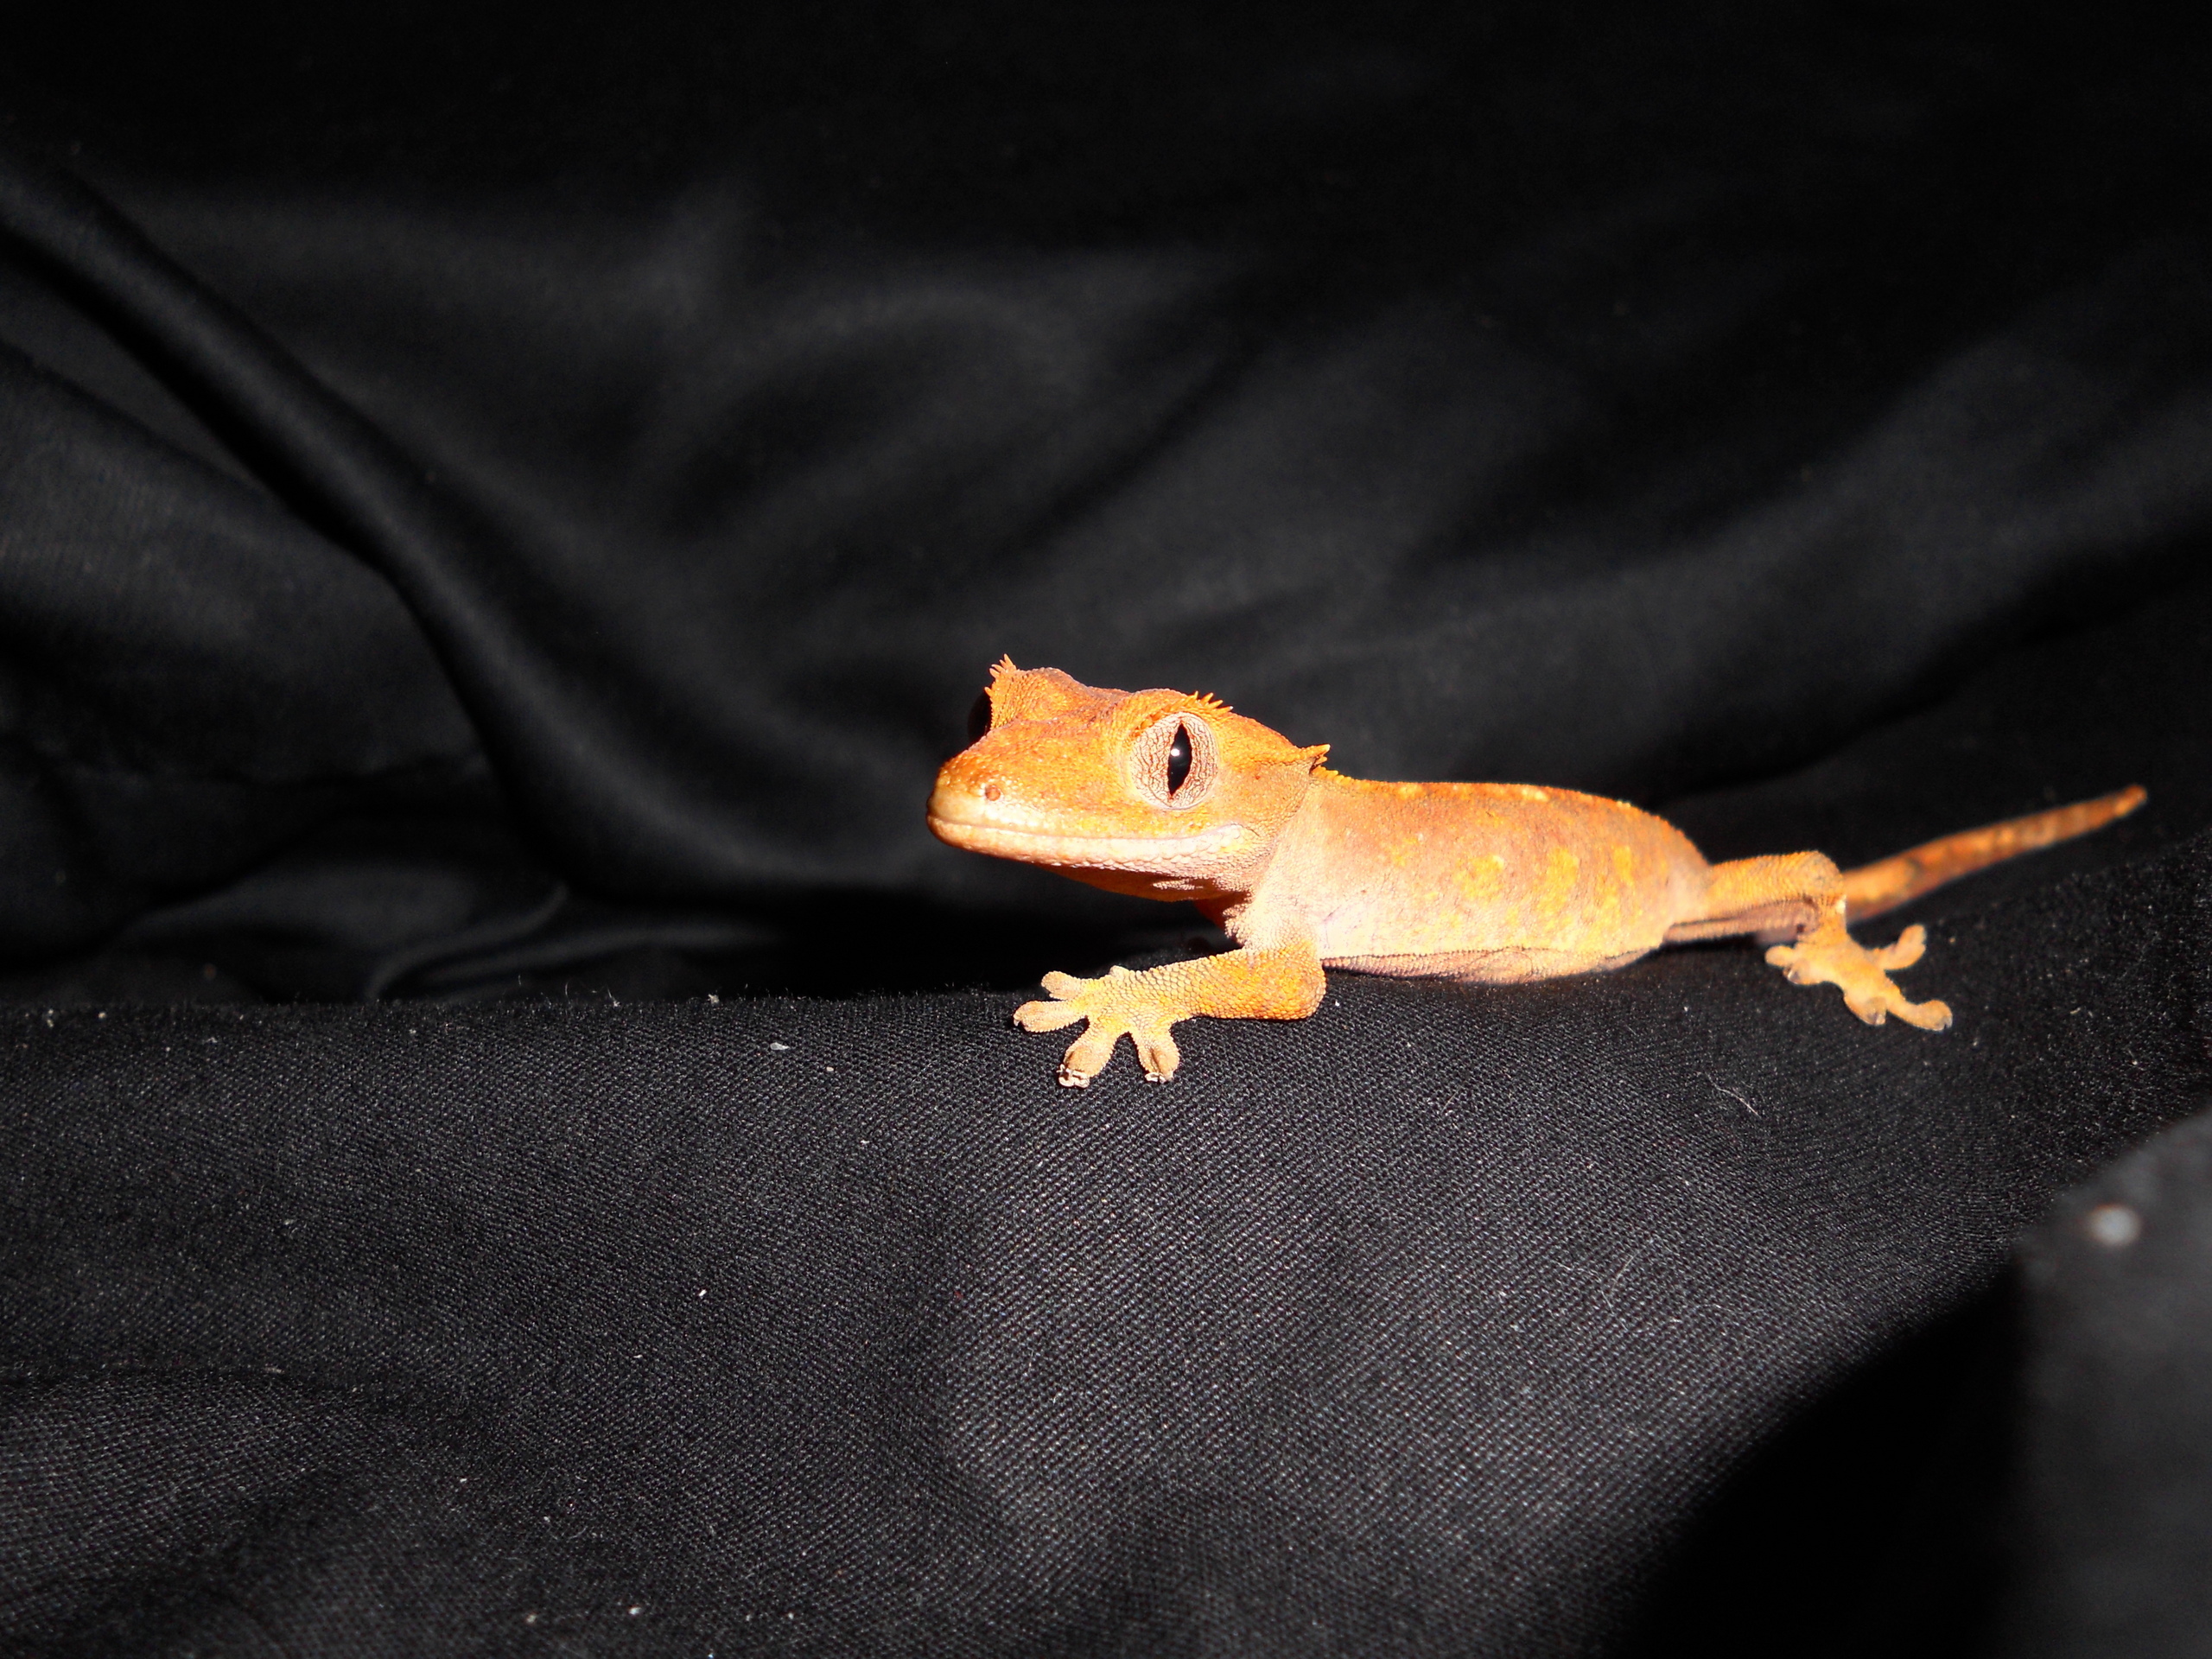 Reptiles image Skeeter, 8 month old crested gecko HD wallpaper